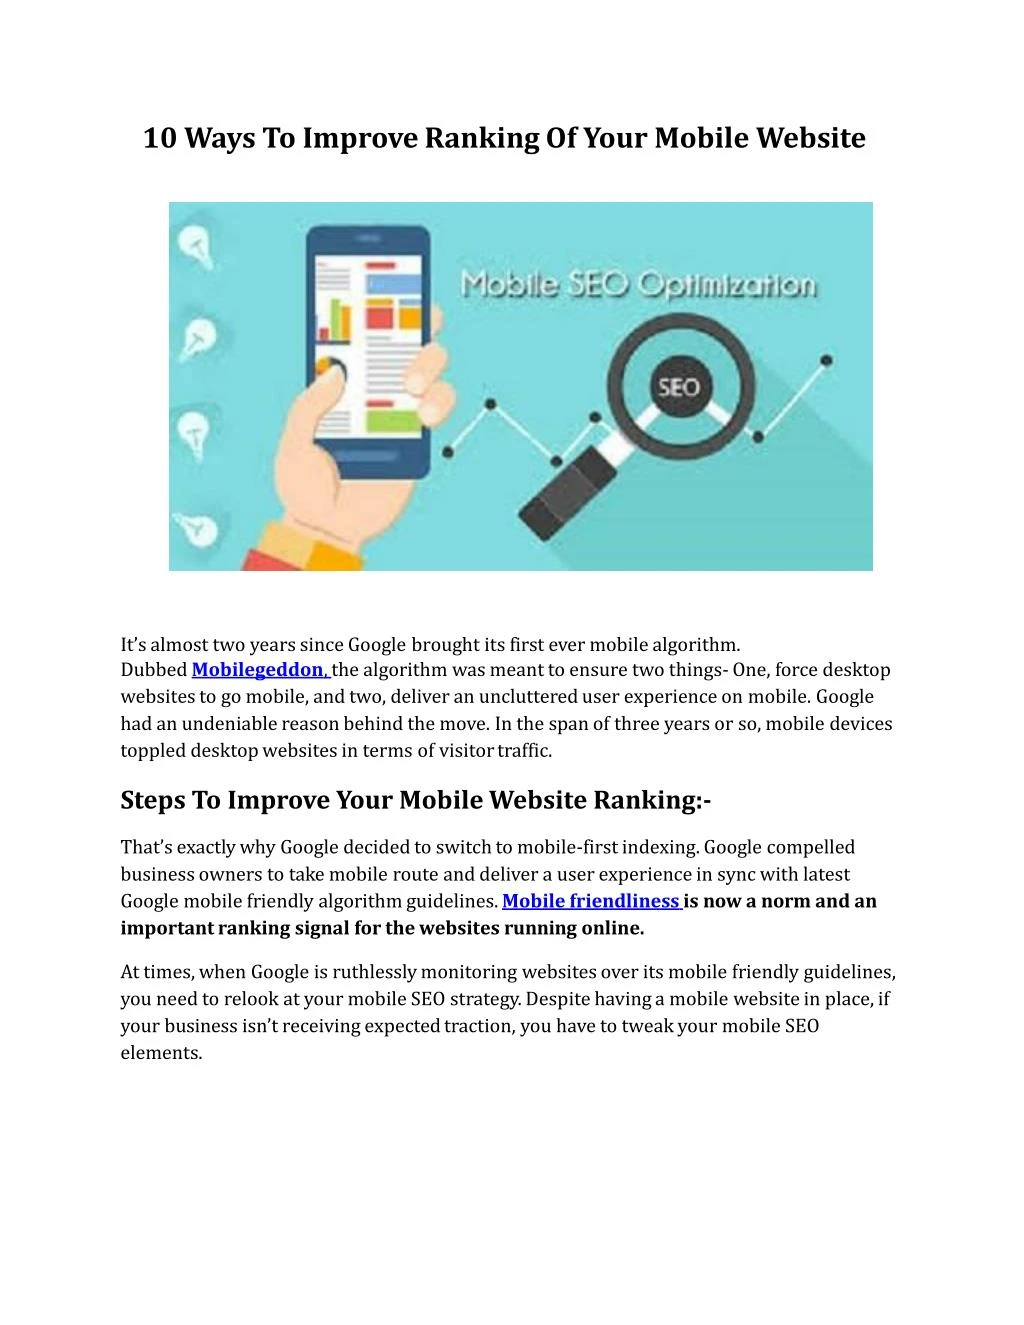 10 ways to improve ranking of your mobile website